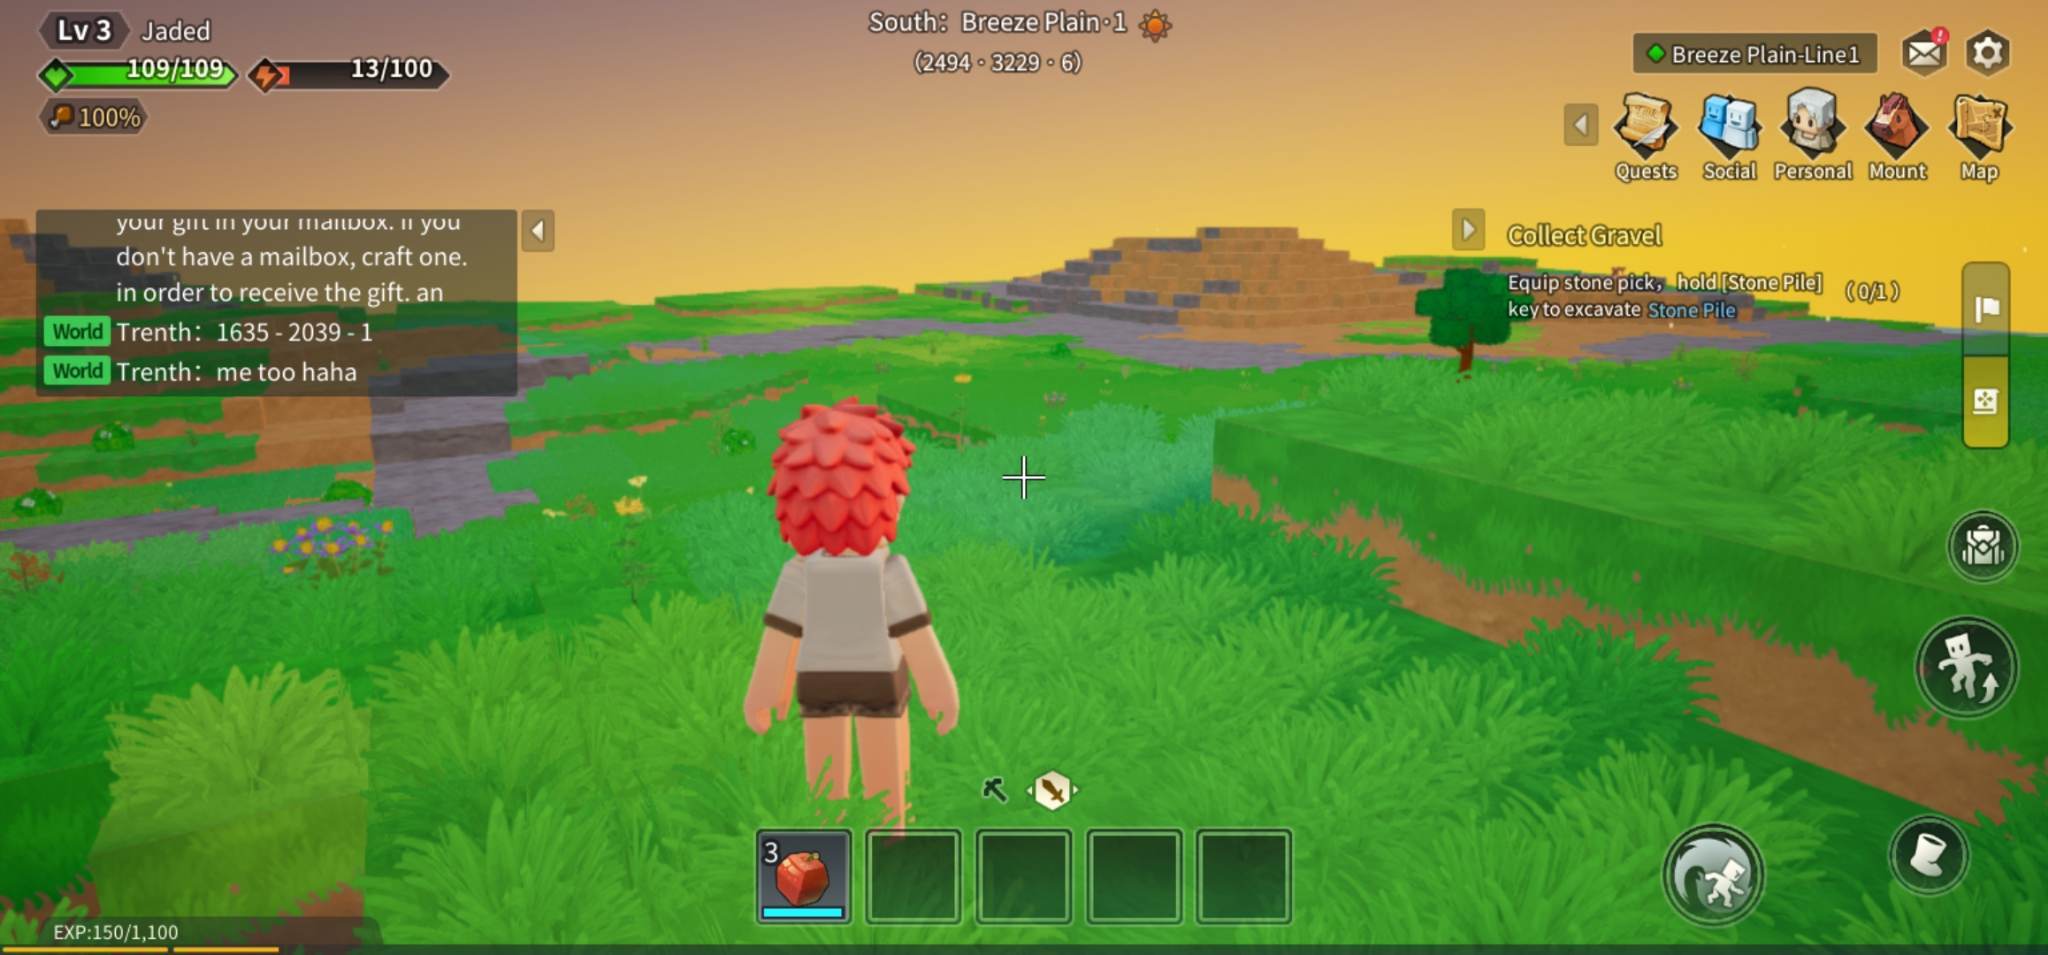 Ro-play Together: The Special Magic that Makes Roblox Games So Fun